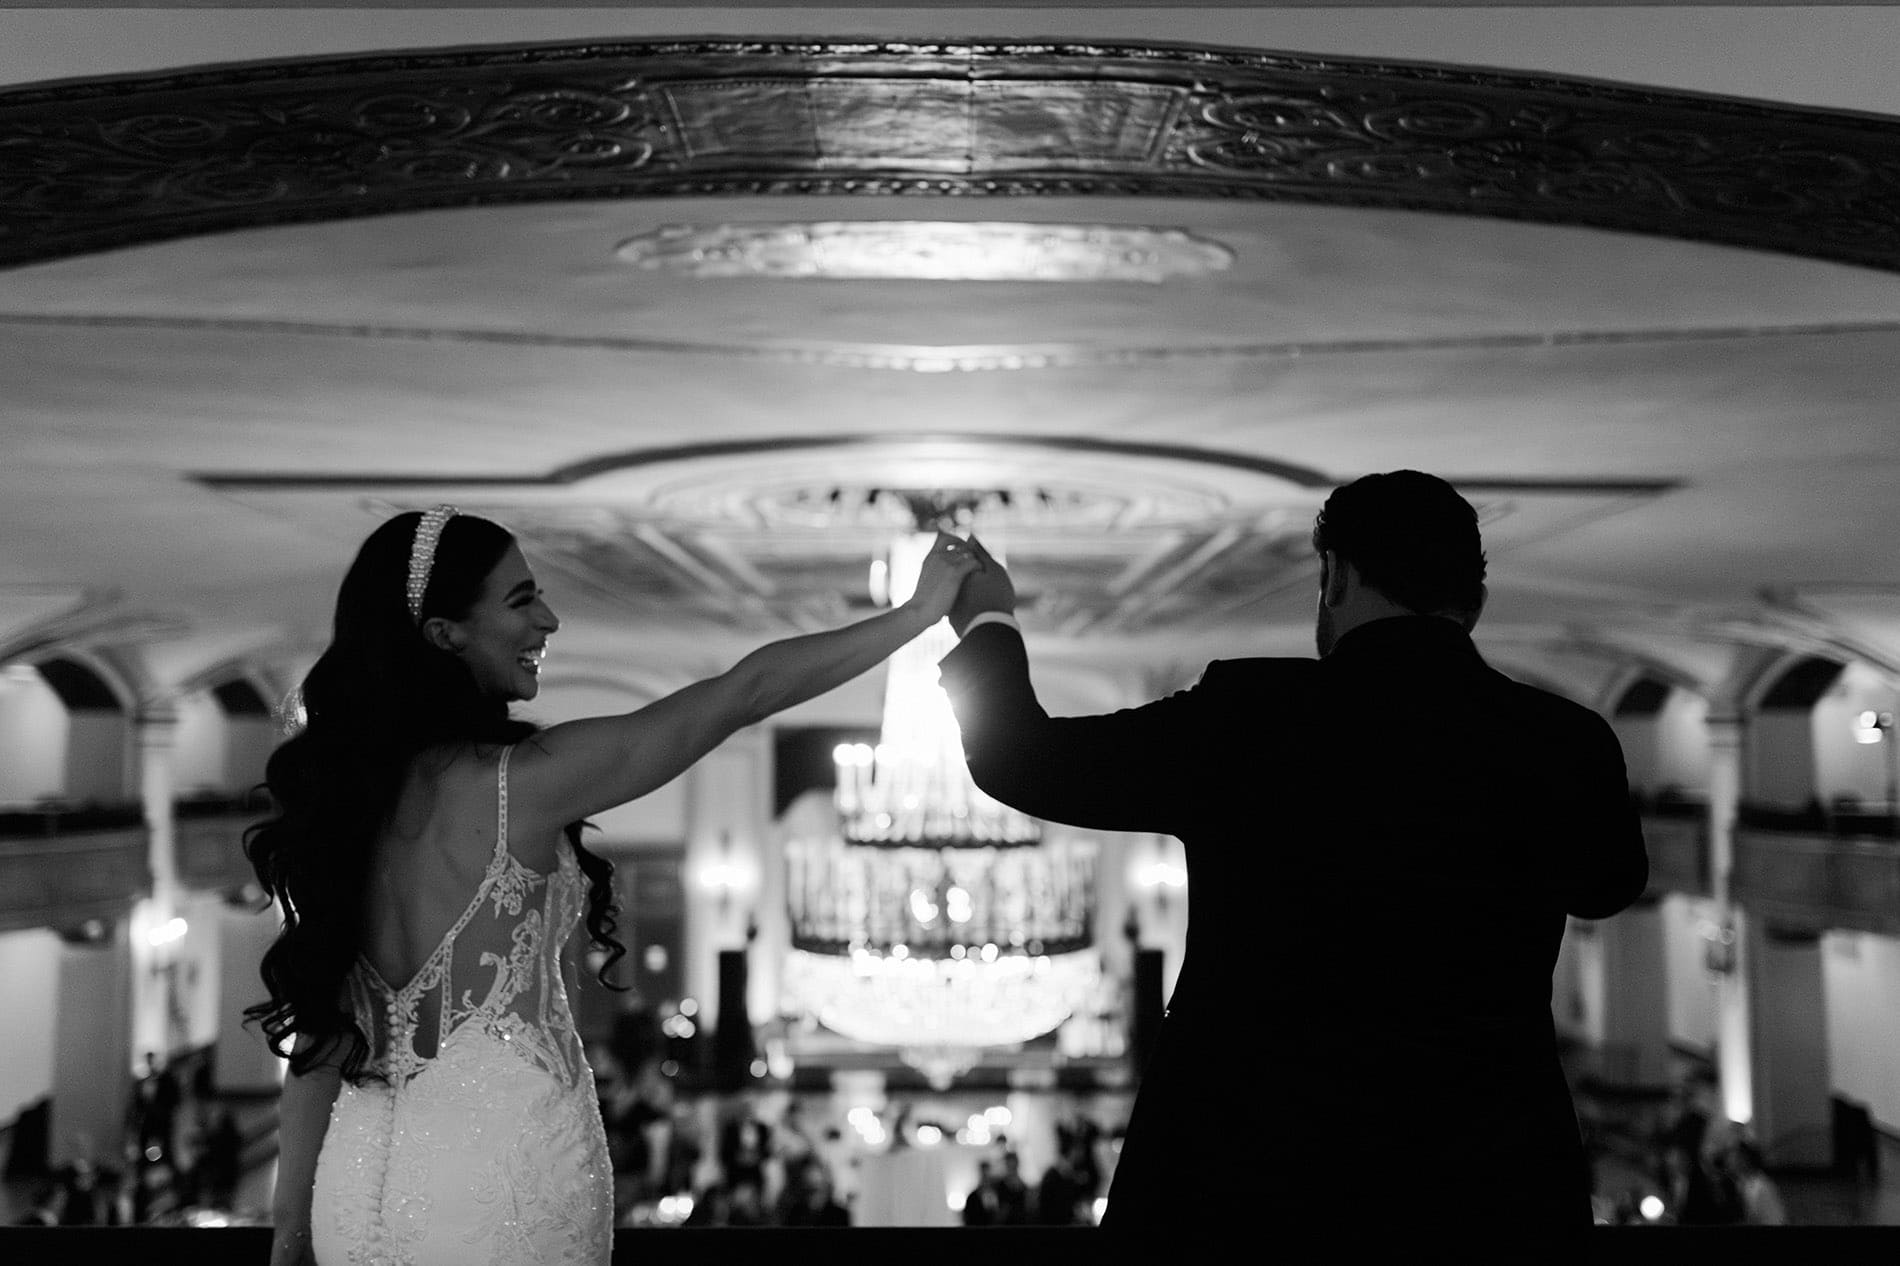 Nicole & Mo’s Til Death Wedding at the Masonic Temple in Detroit